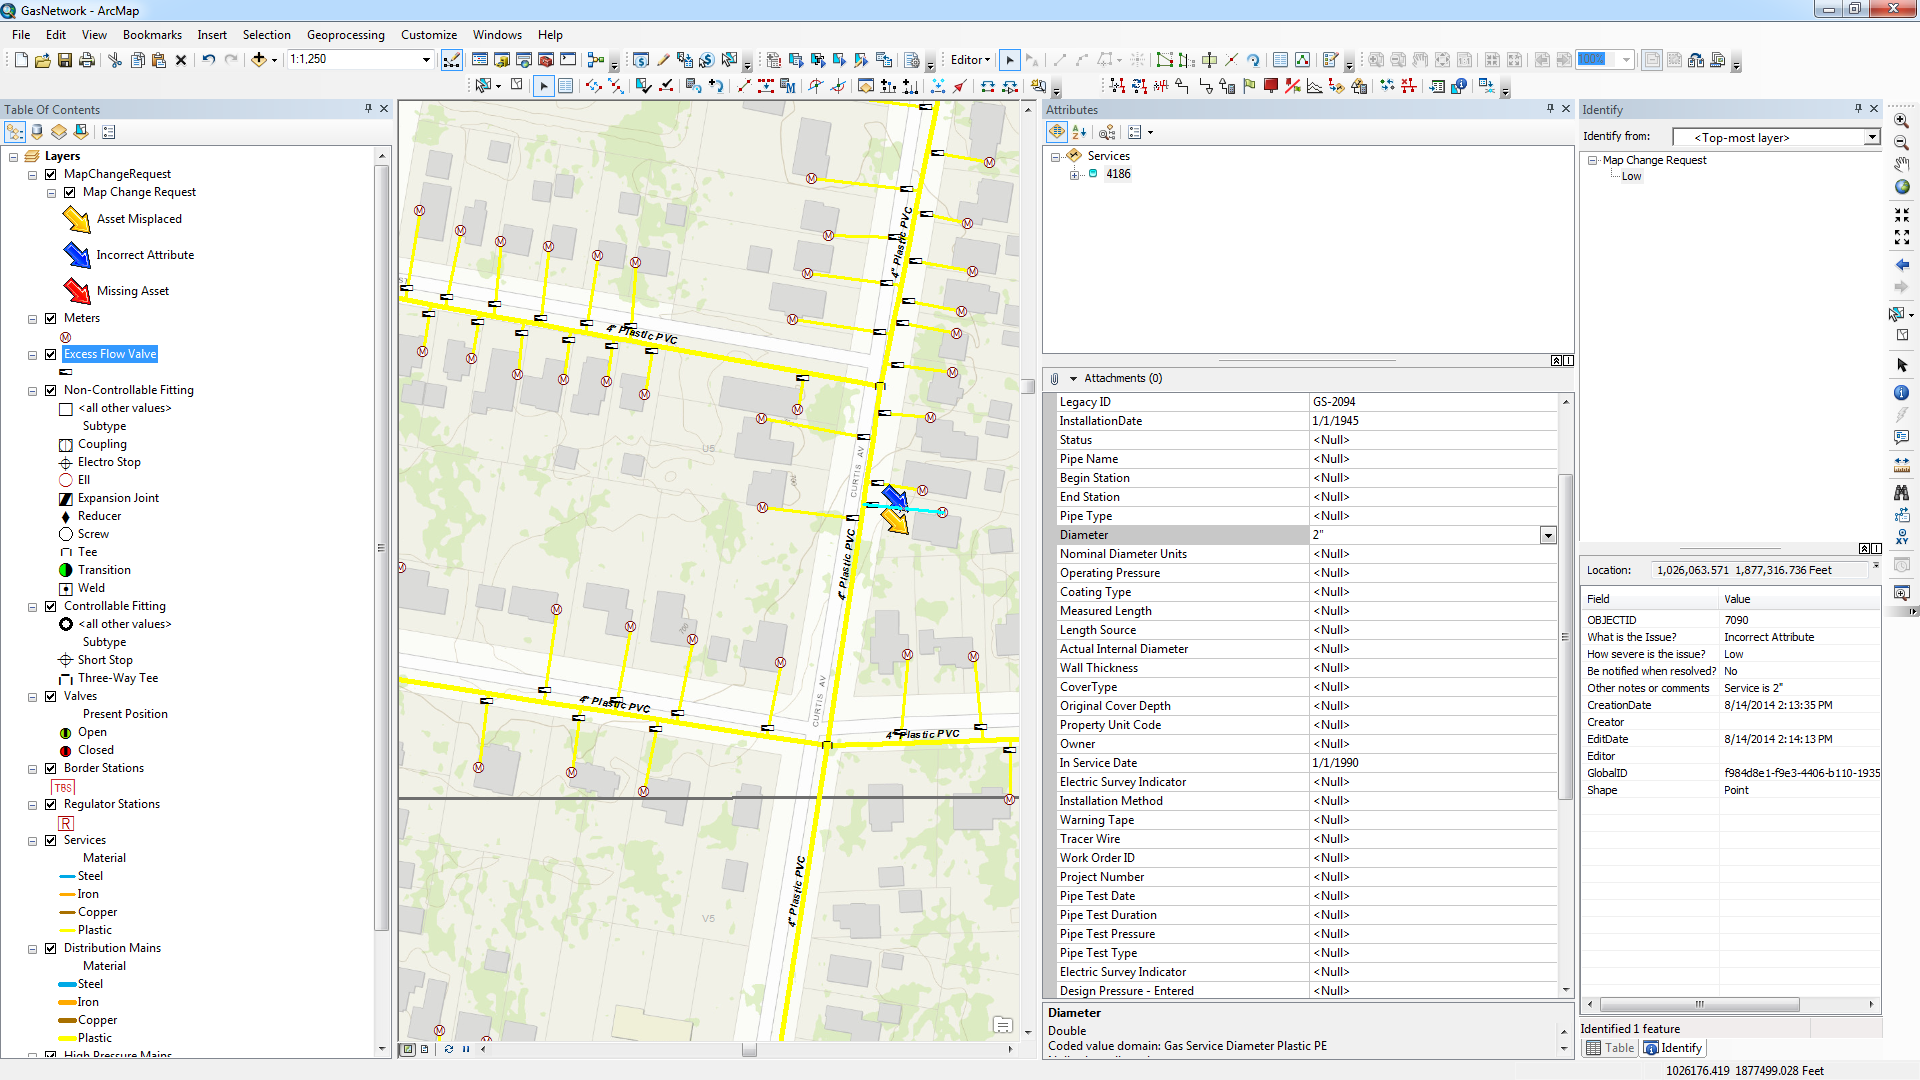 Edit the network data in an editing session in ArcMap